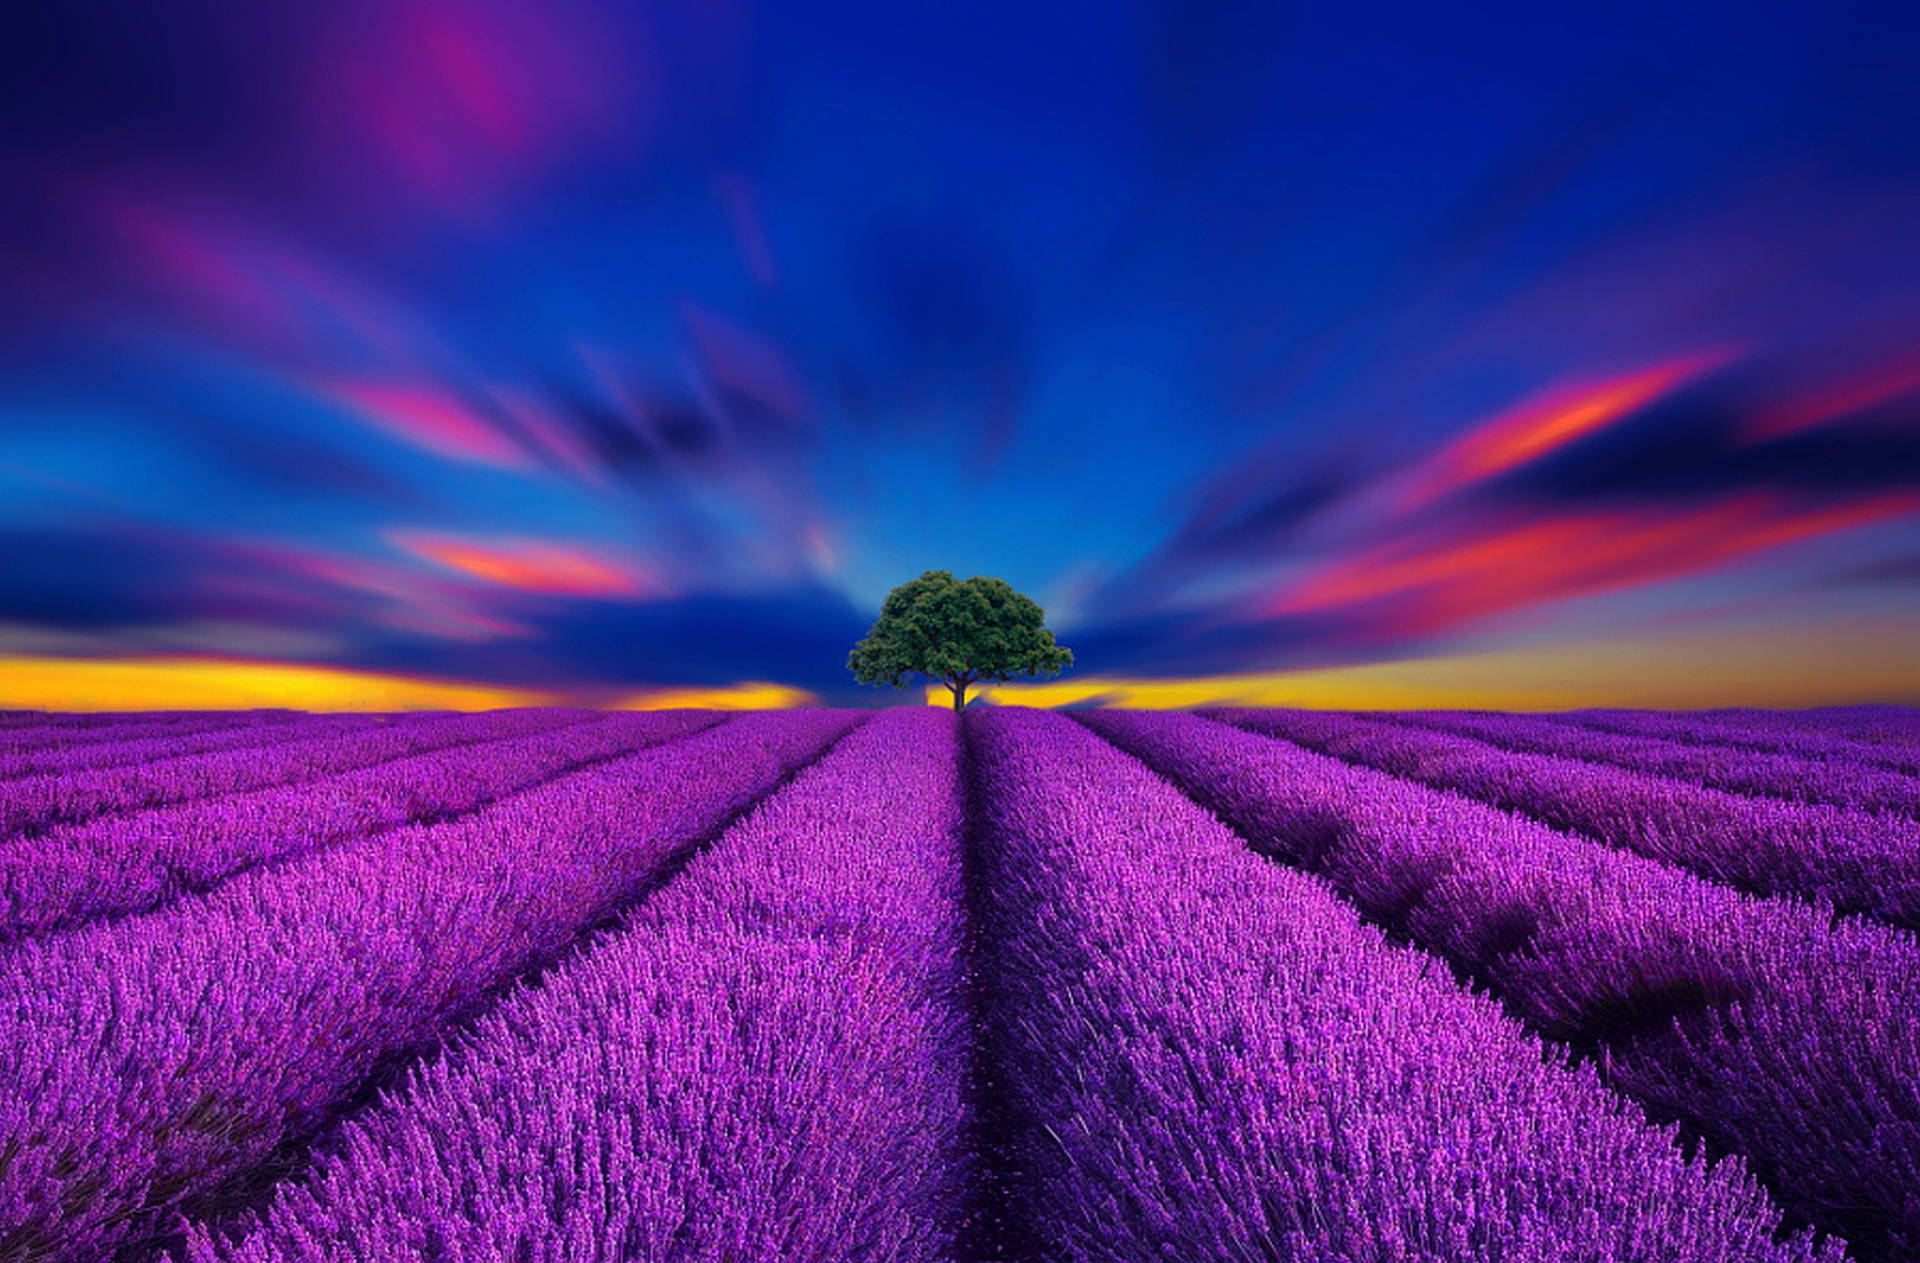 Lavender Aesthetic Field And Vibrant Blue Skies